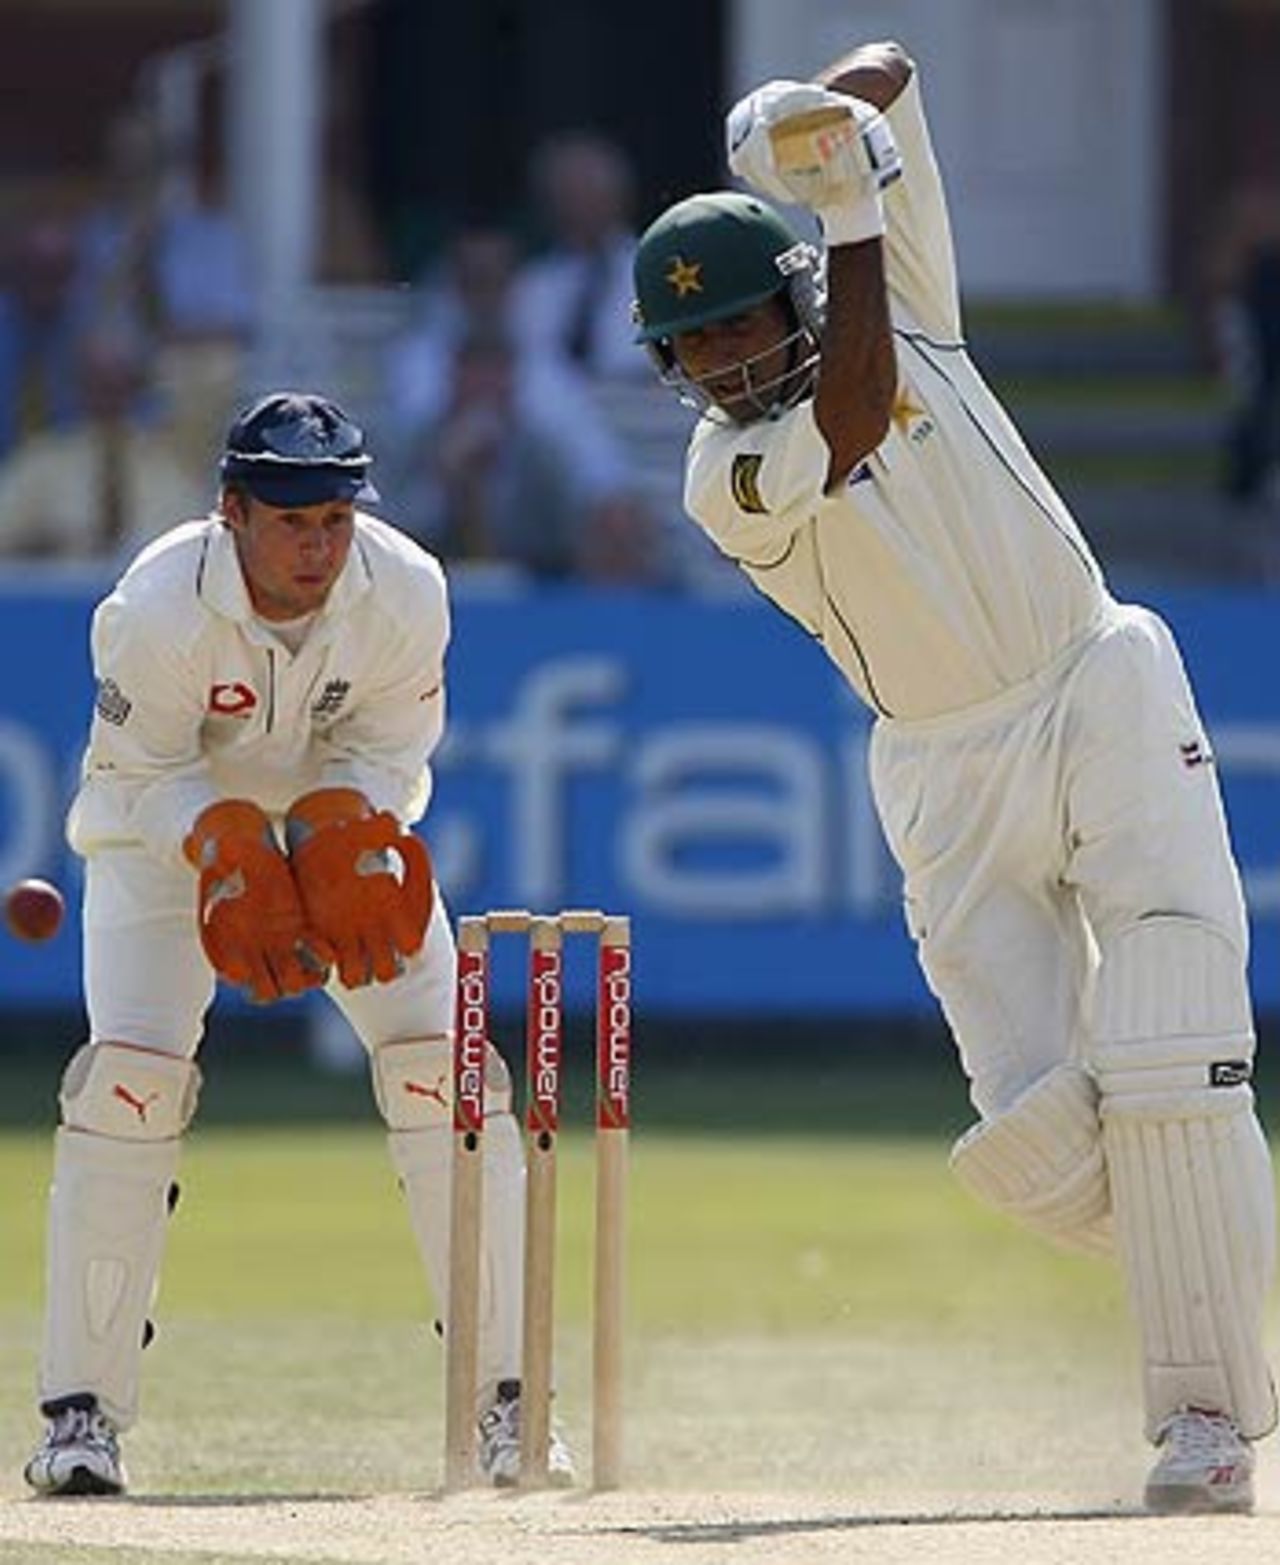 Abdul Razzaq's steady innings helped Pakistan avoid any alarms at the end, England v Pakistan, 1st Test, Lord's, July 17, 2006